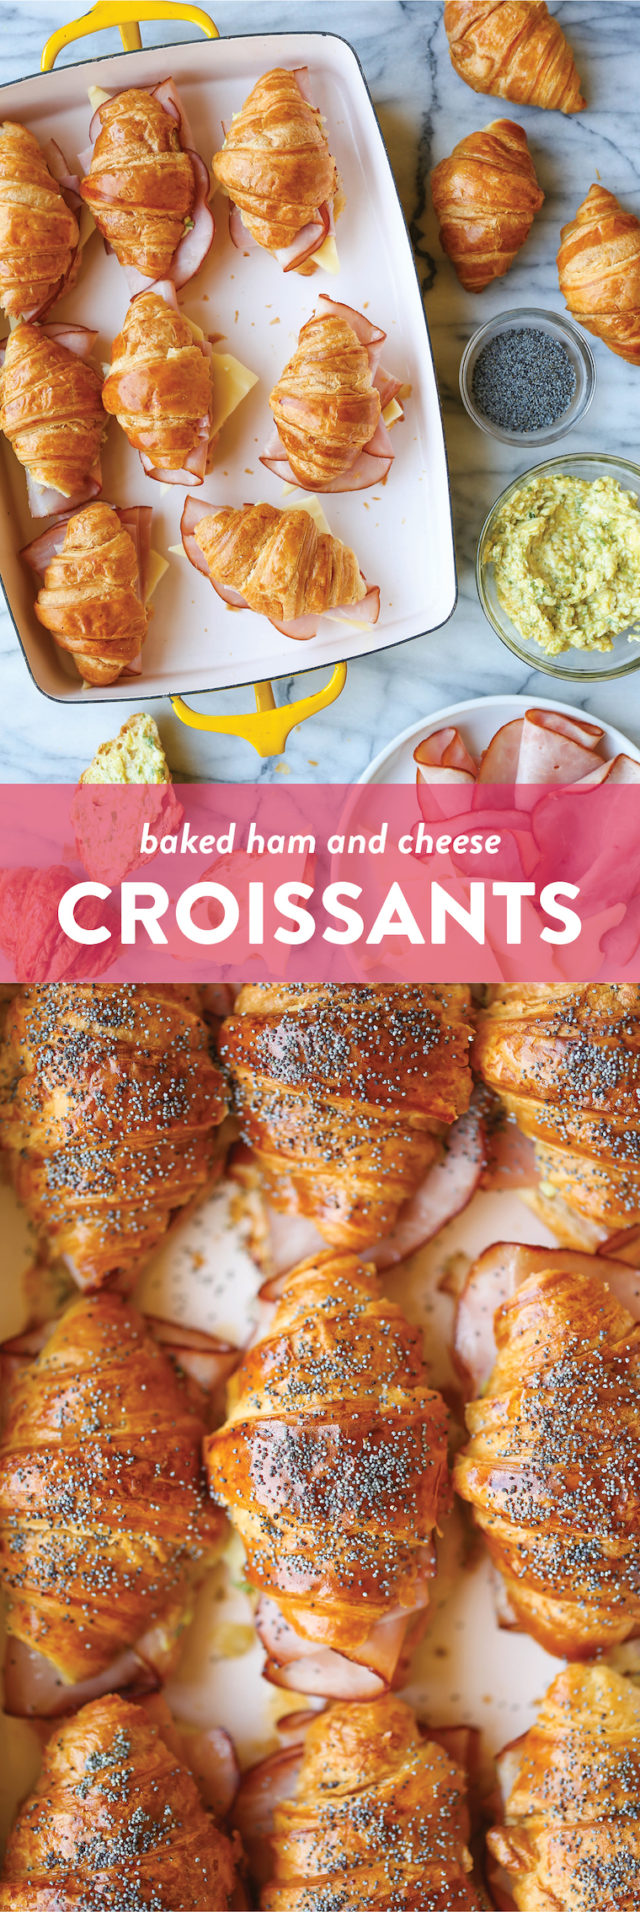 Baked Ham and Cheese Croissants - Damn Delicious